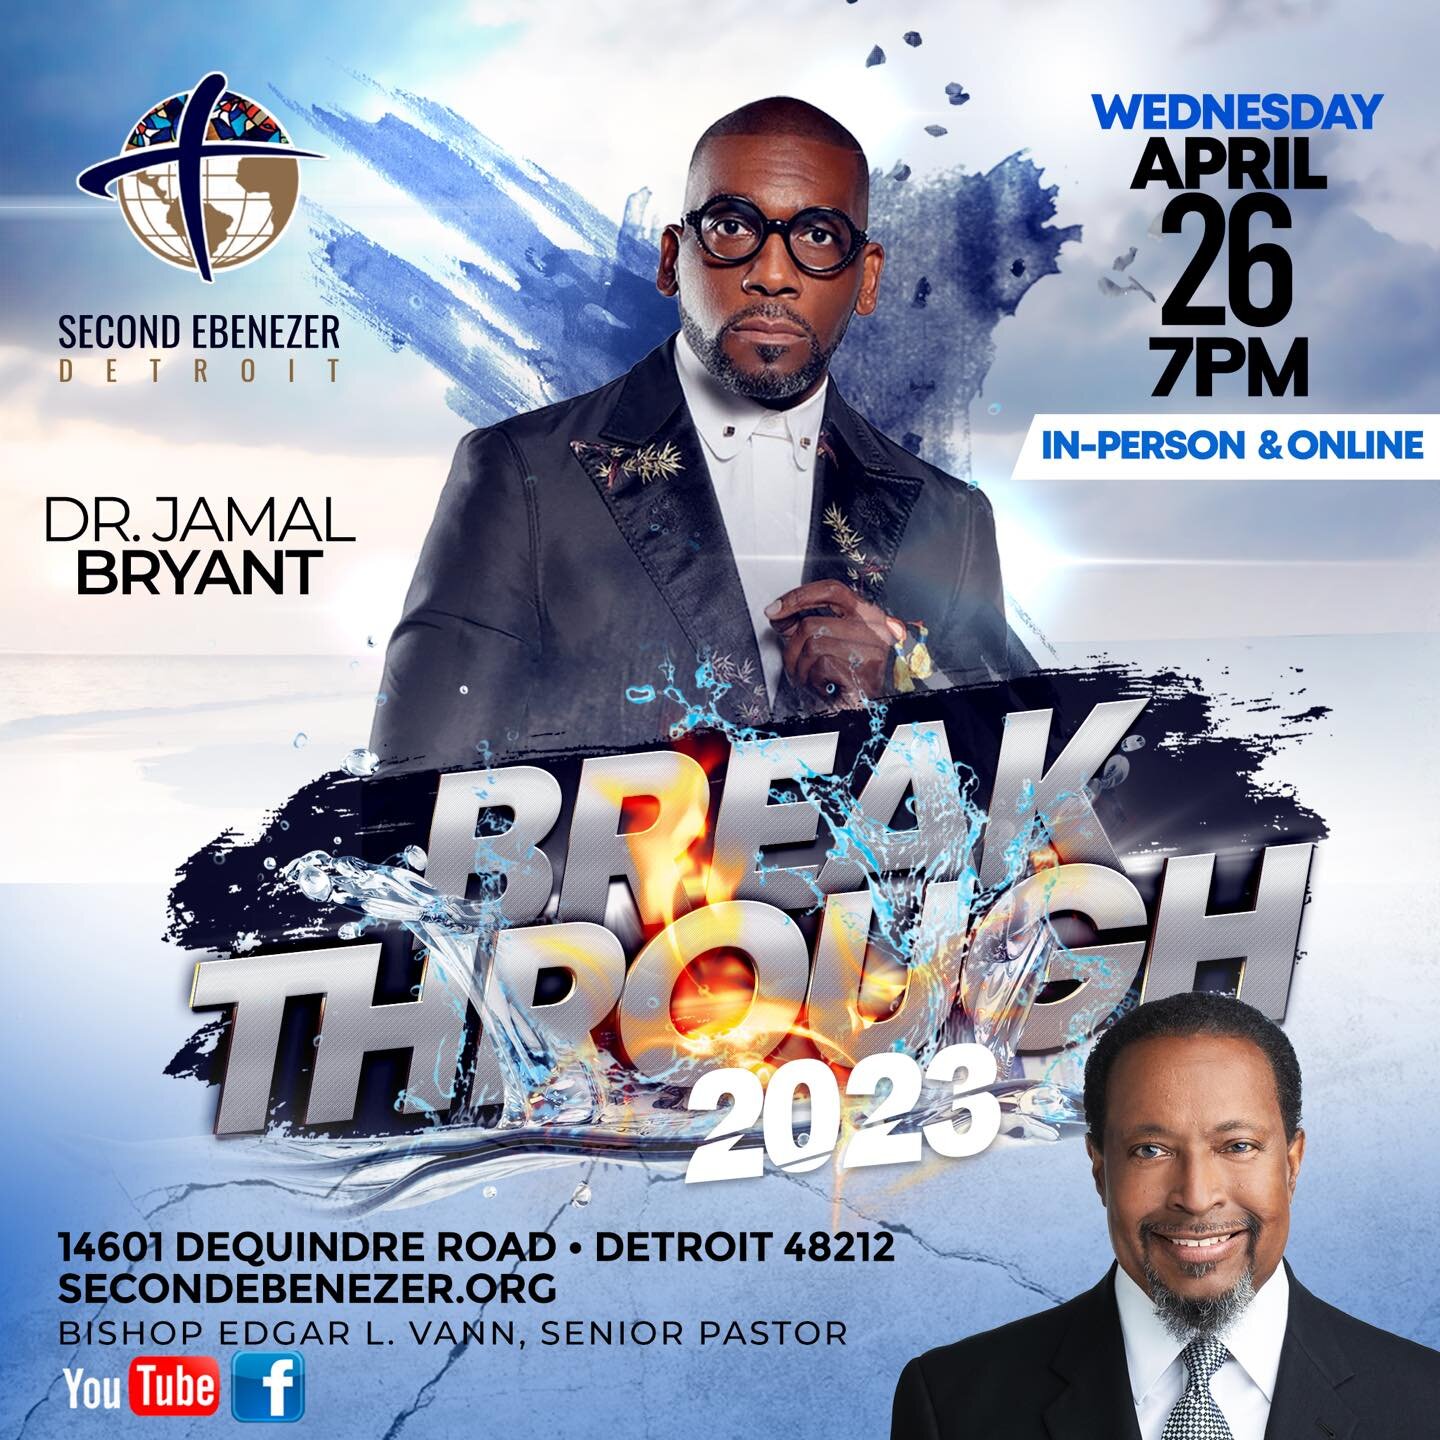 Join us tonight for day 2 of Breakthrough 2023! Revival is here and we can't wait to hear from the powerhouse &mdash;Dr. Jamal Bryant at 7pm. Bring a friend and be ready to be uplifted, impacted, and inspired! #Breakthrough2023 #Revival #DrJamalBryan